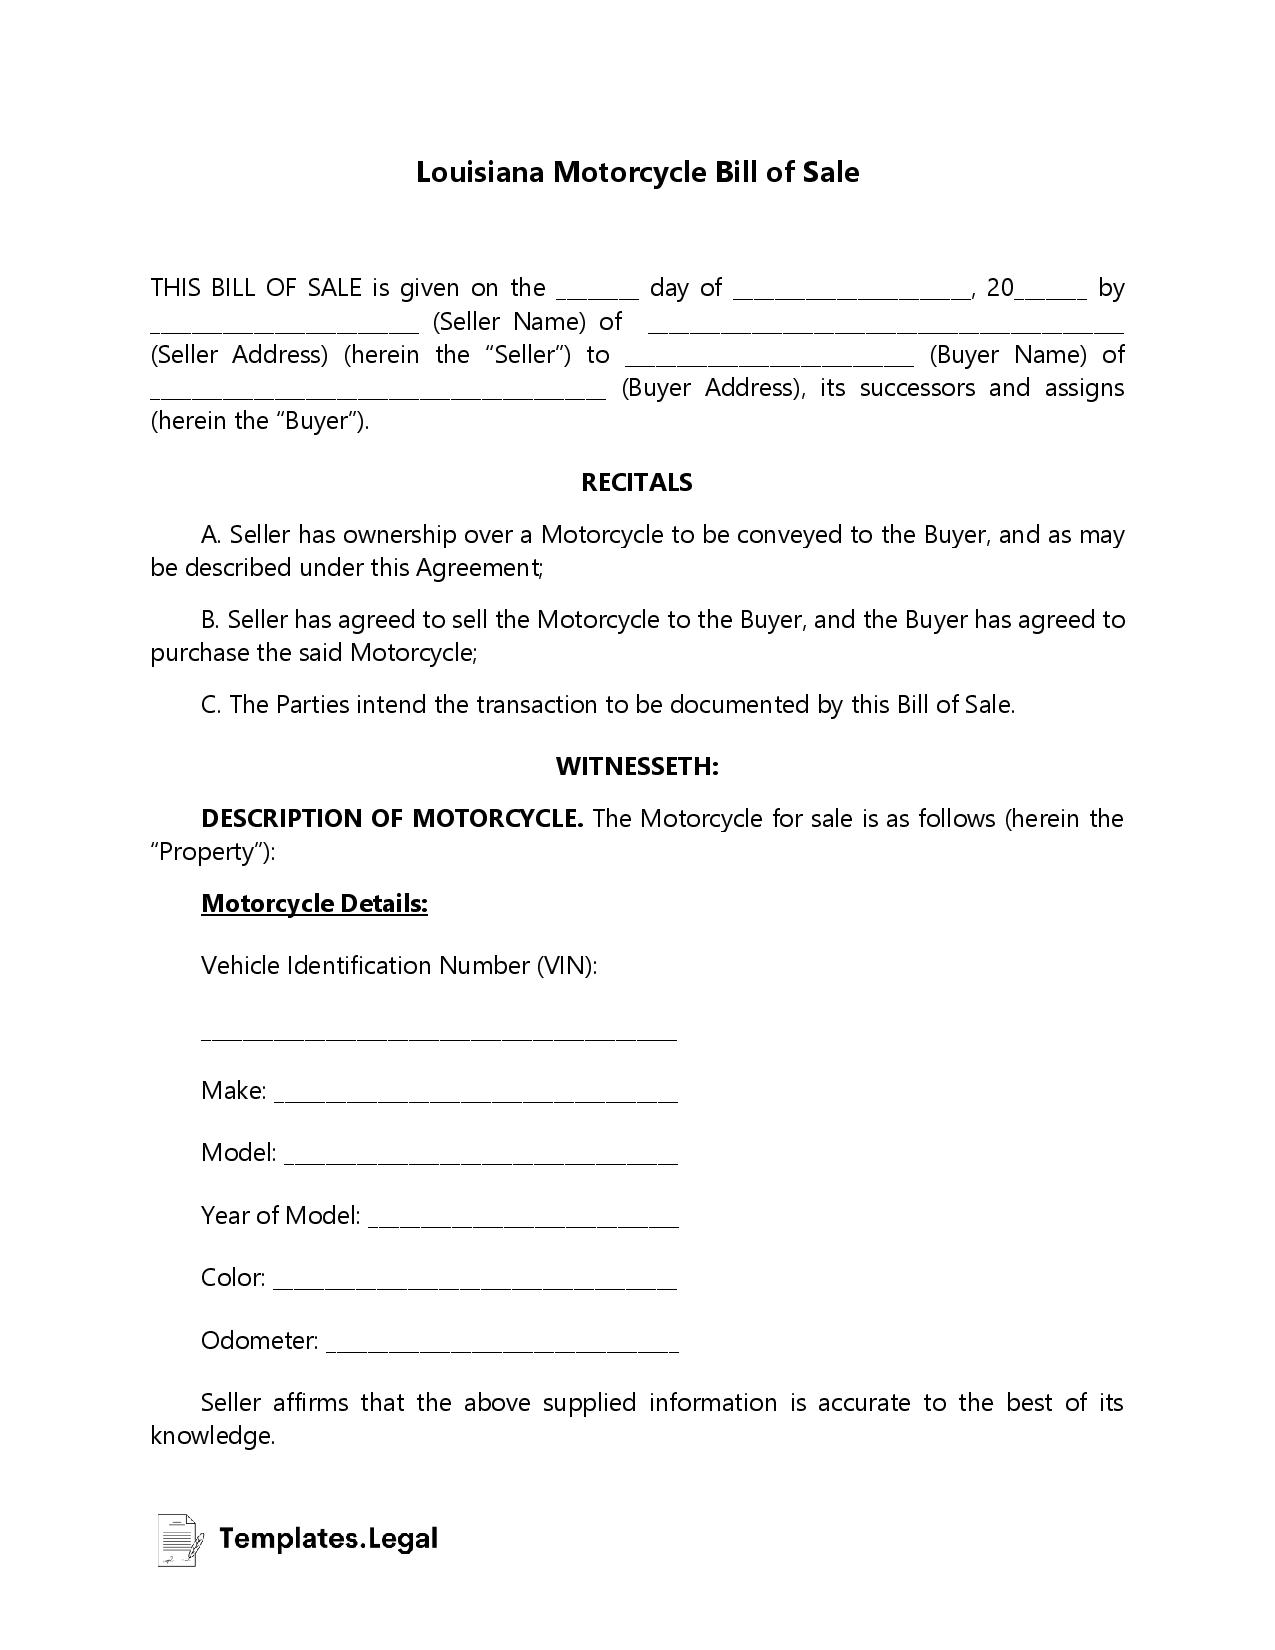 Louisiana Motorcycle Bill of Sale - Templates.Legal